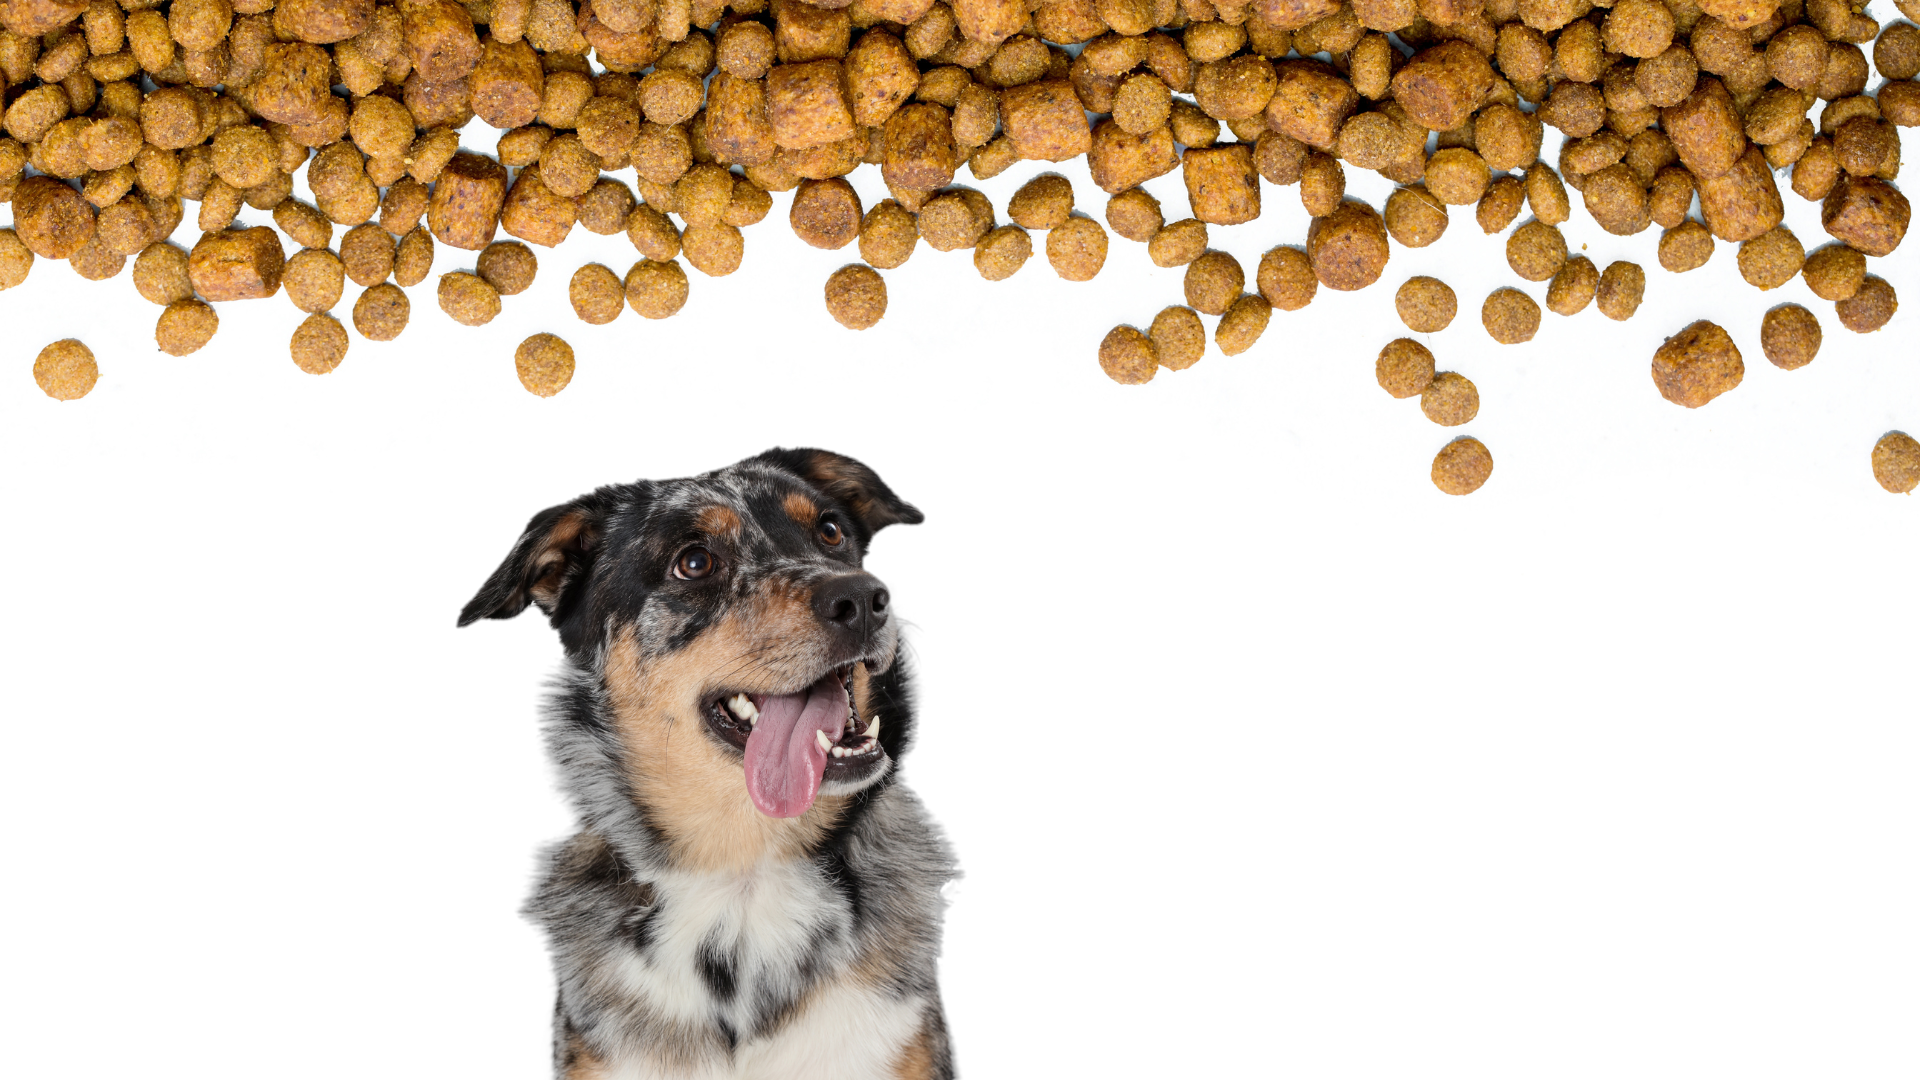 Specialized dog foods may curb cutaneous adverse food reaction